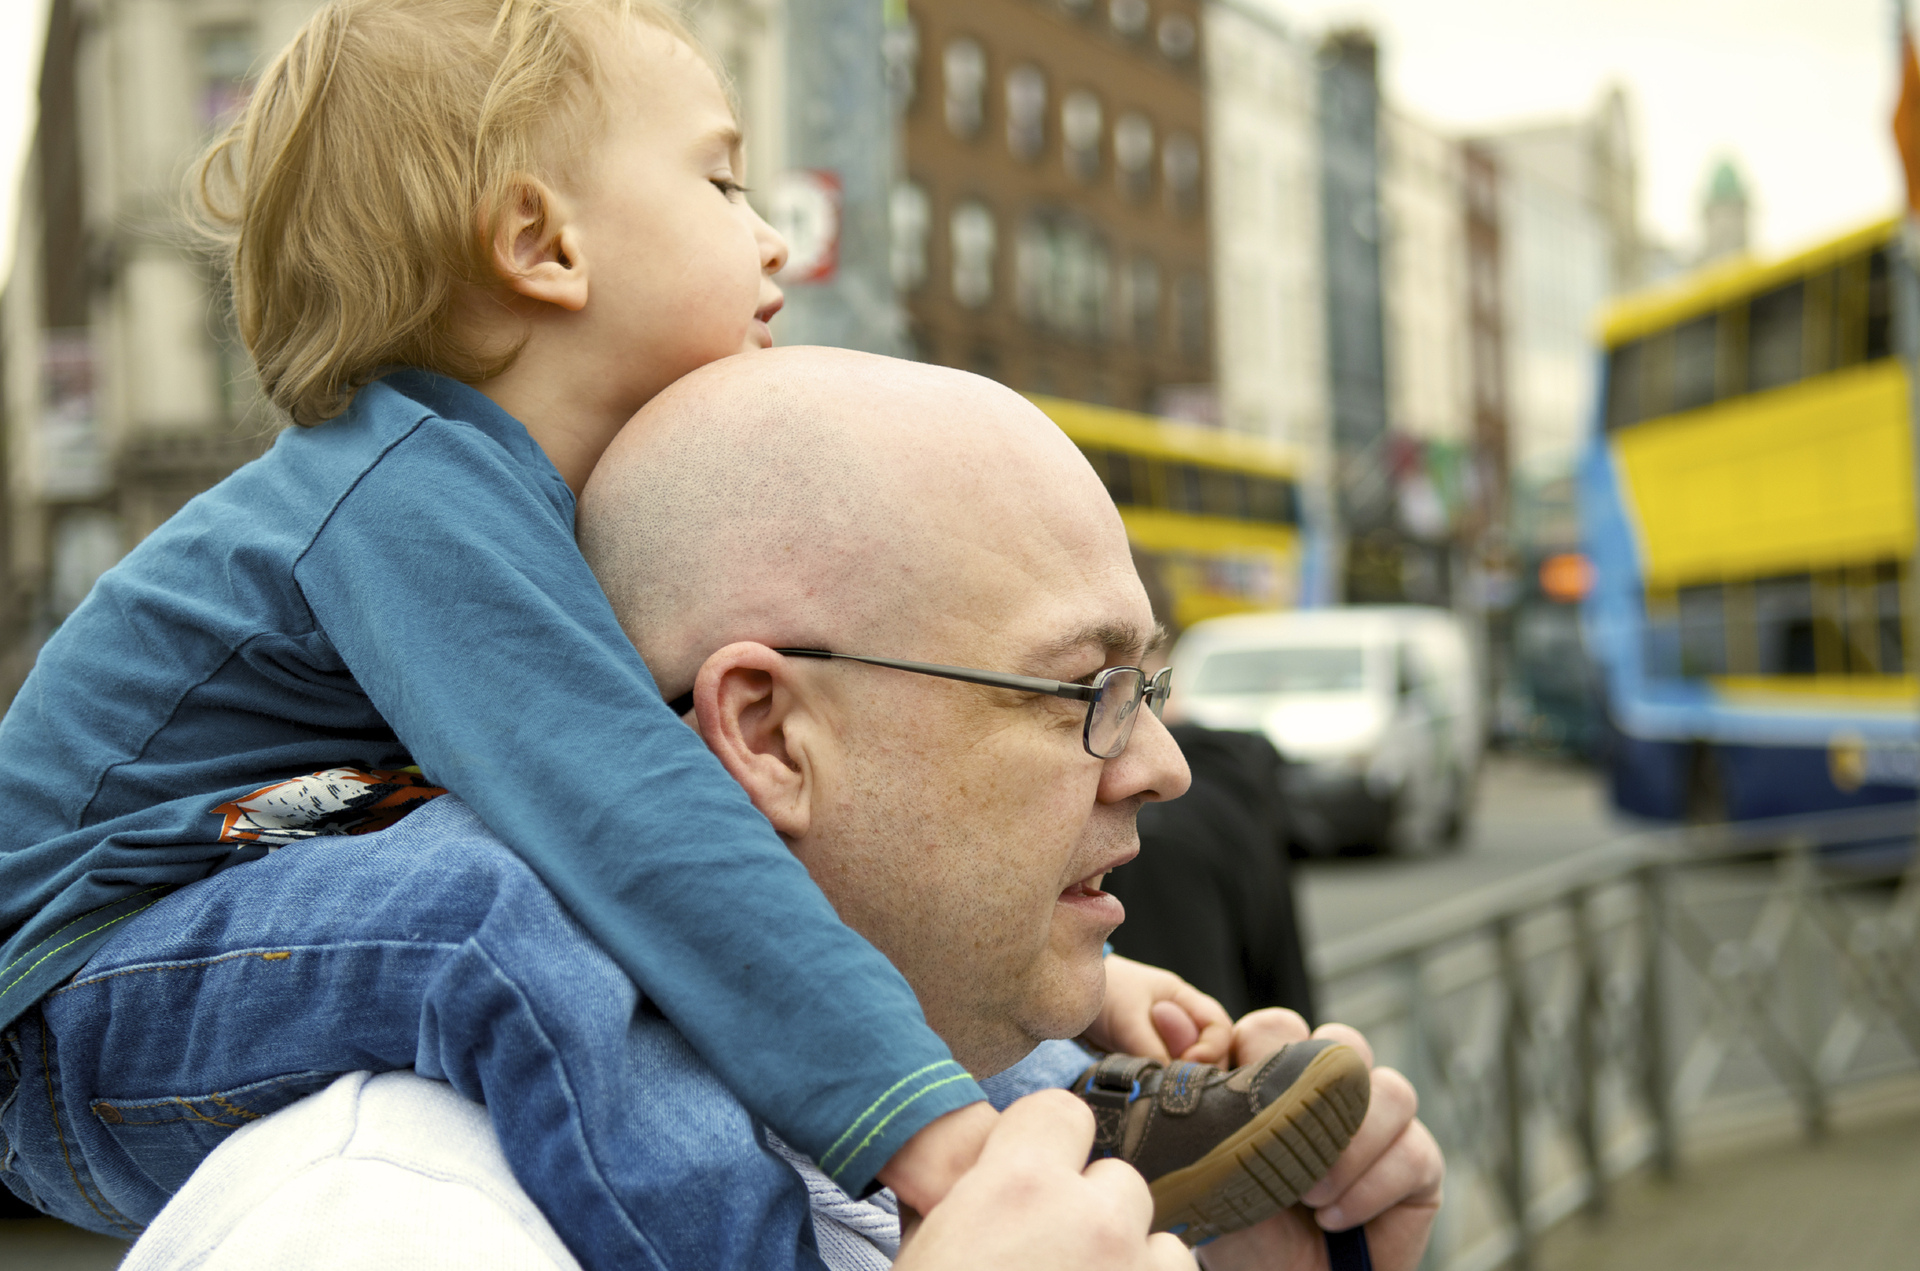 Bald man and son on shoulders.jpg